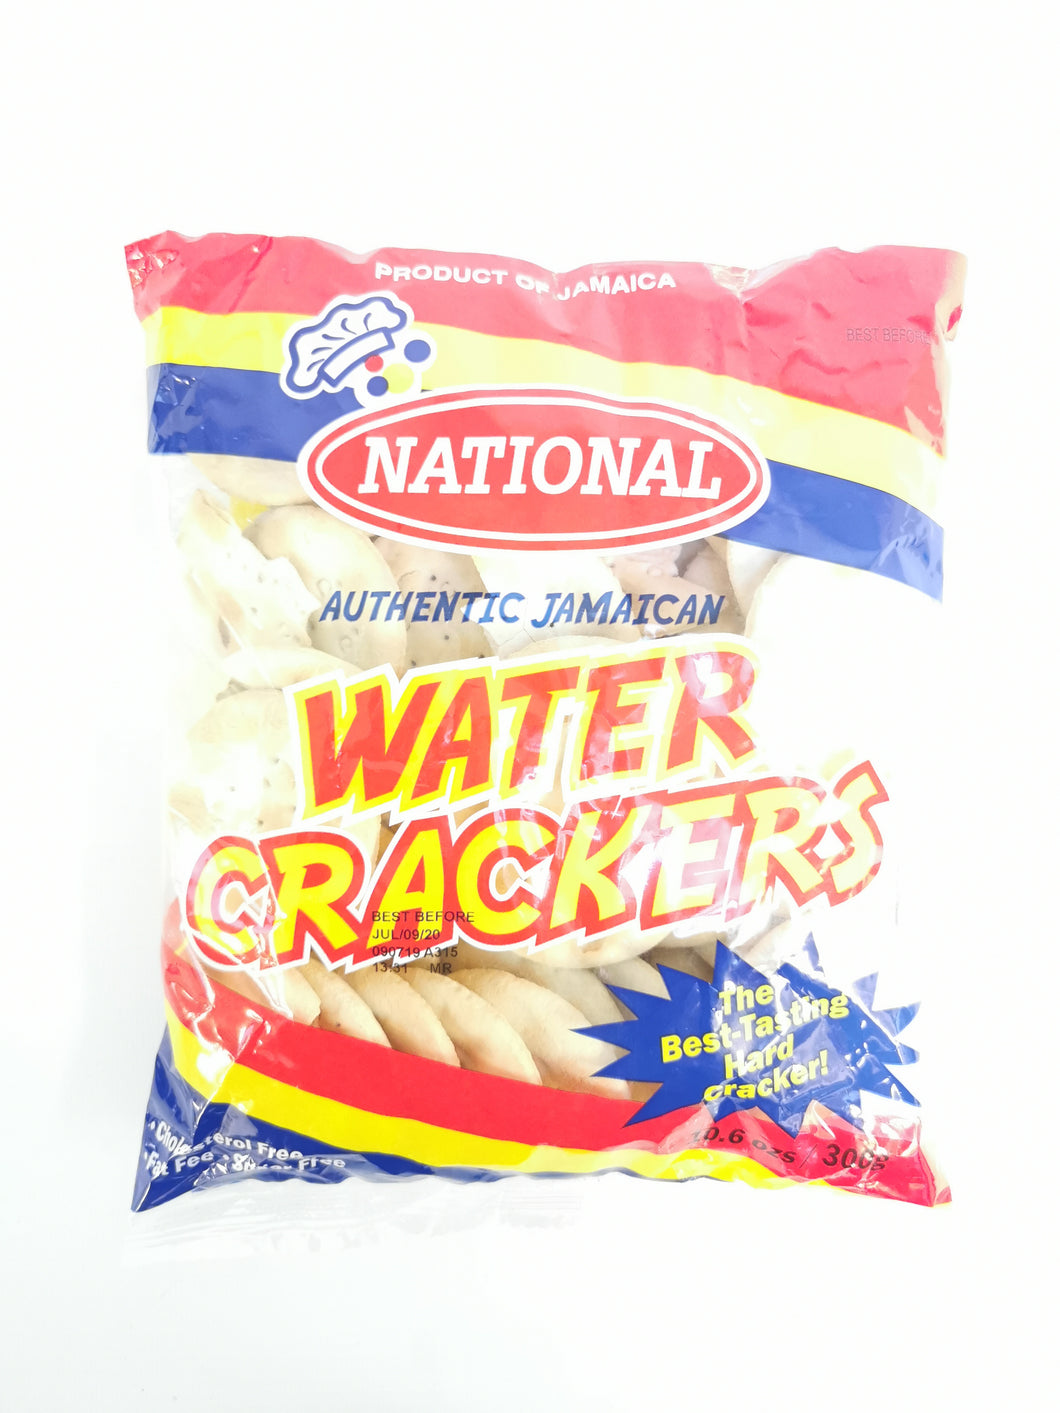 National Authentic Jamaican Water Crackers